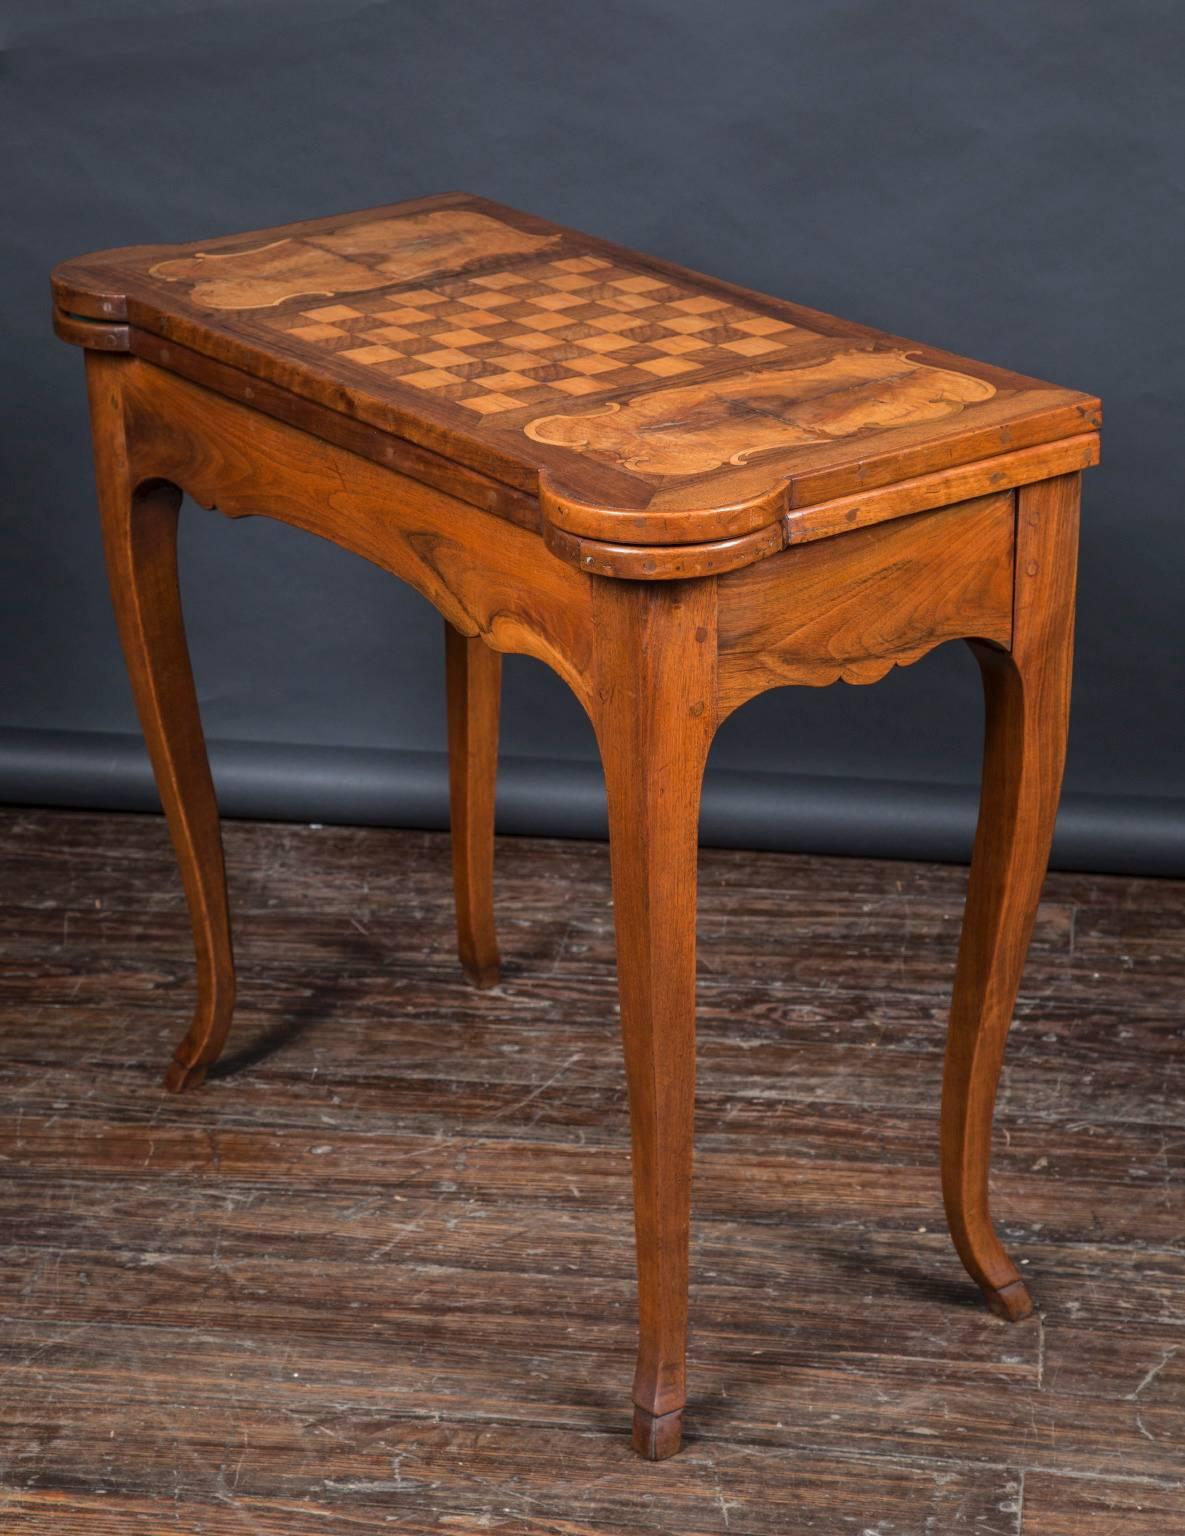 This 18th century game table is made of fruitwood with an inlaid checker board on top. The table has storage space for game pieces beneath the top, and the top folds open to reveal a green felt playing surface. The table is by Hache, and is stamped